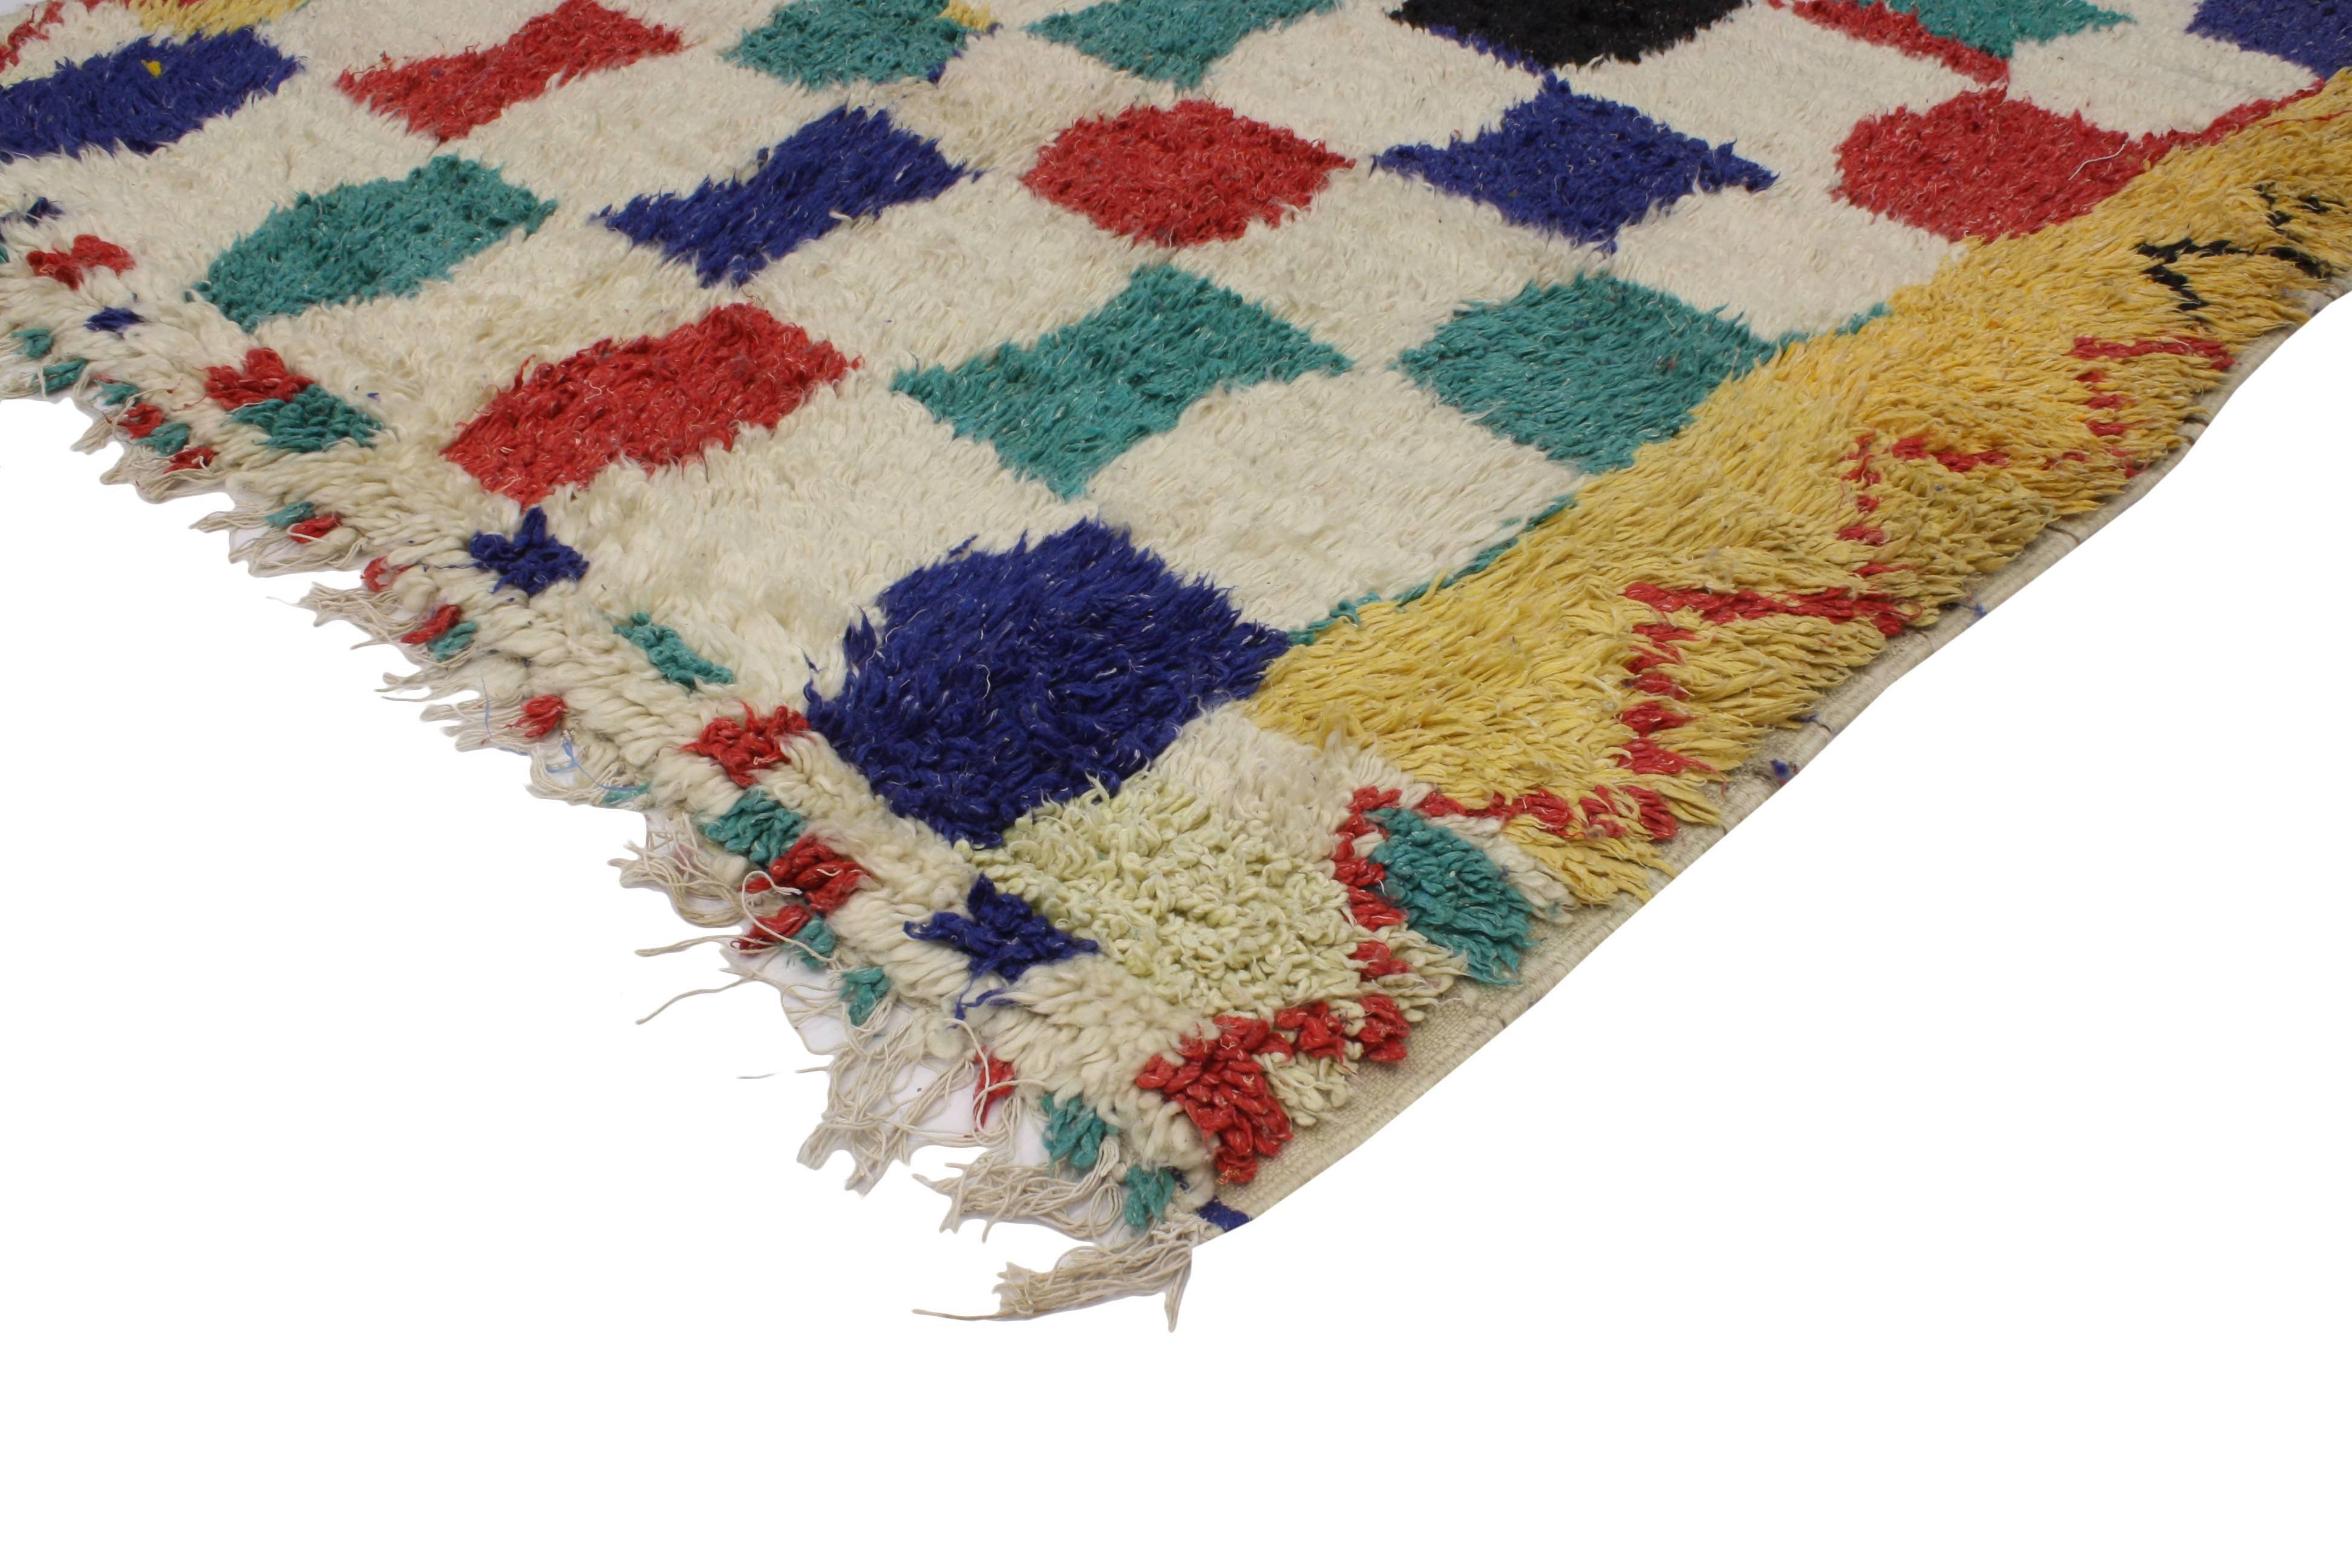 20437 Mid-Century Modern Vintage Berber Moroccan Azilal Rug with Tribal Style. With its dramatic color block pattern and Primitive motifs based on ancient traditions, this Mid-Century Modern vintage Berber Moroccan rug showcases true tribal style